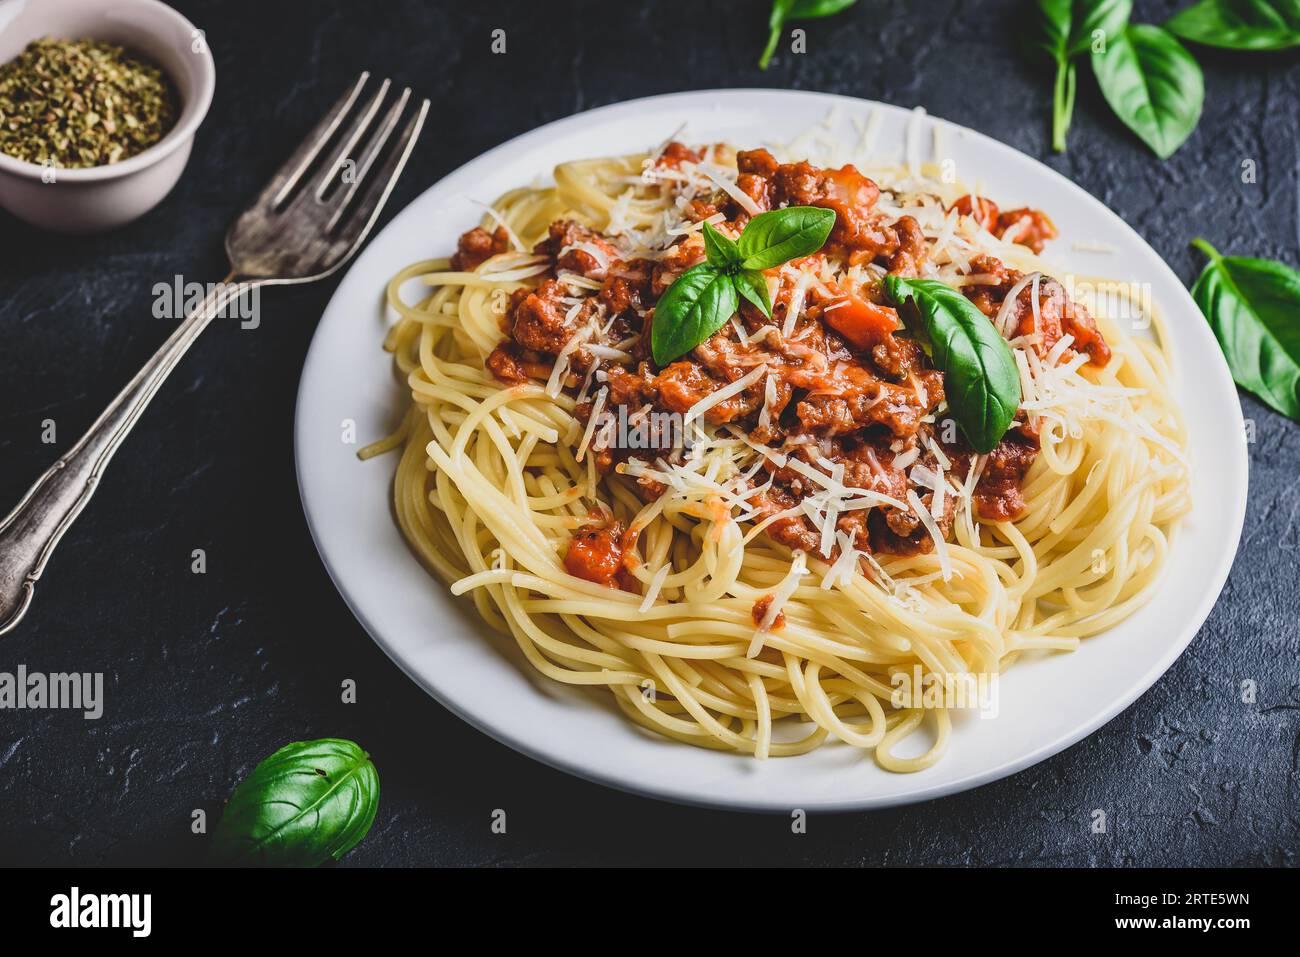 Spaghetti with bolognese sauce, grated parmesan cheese and fresh basil leaves Stock Photo